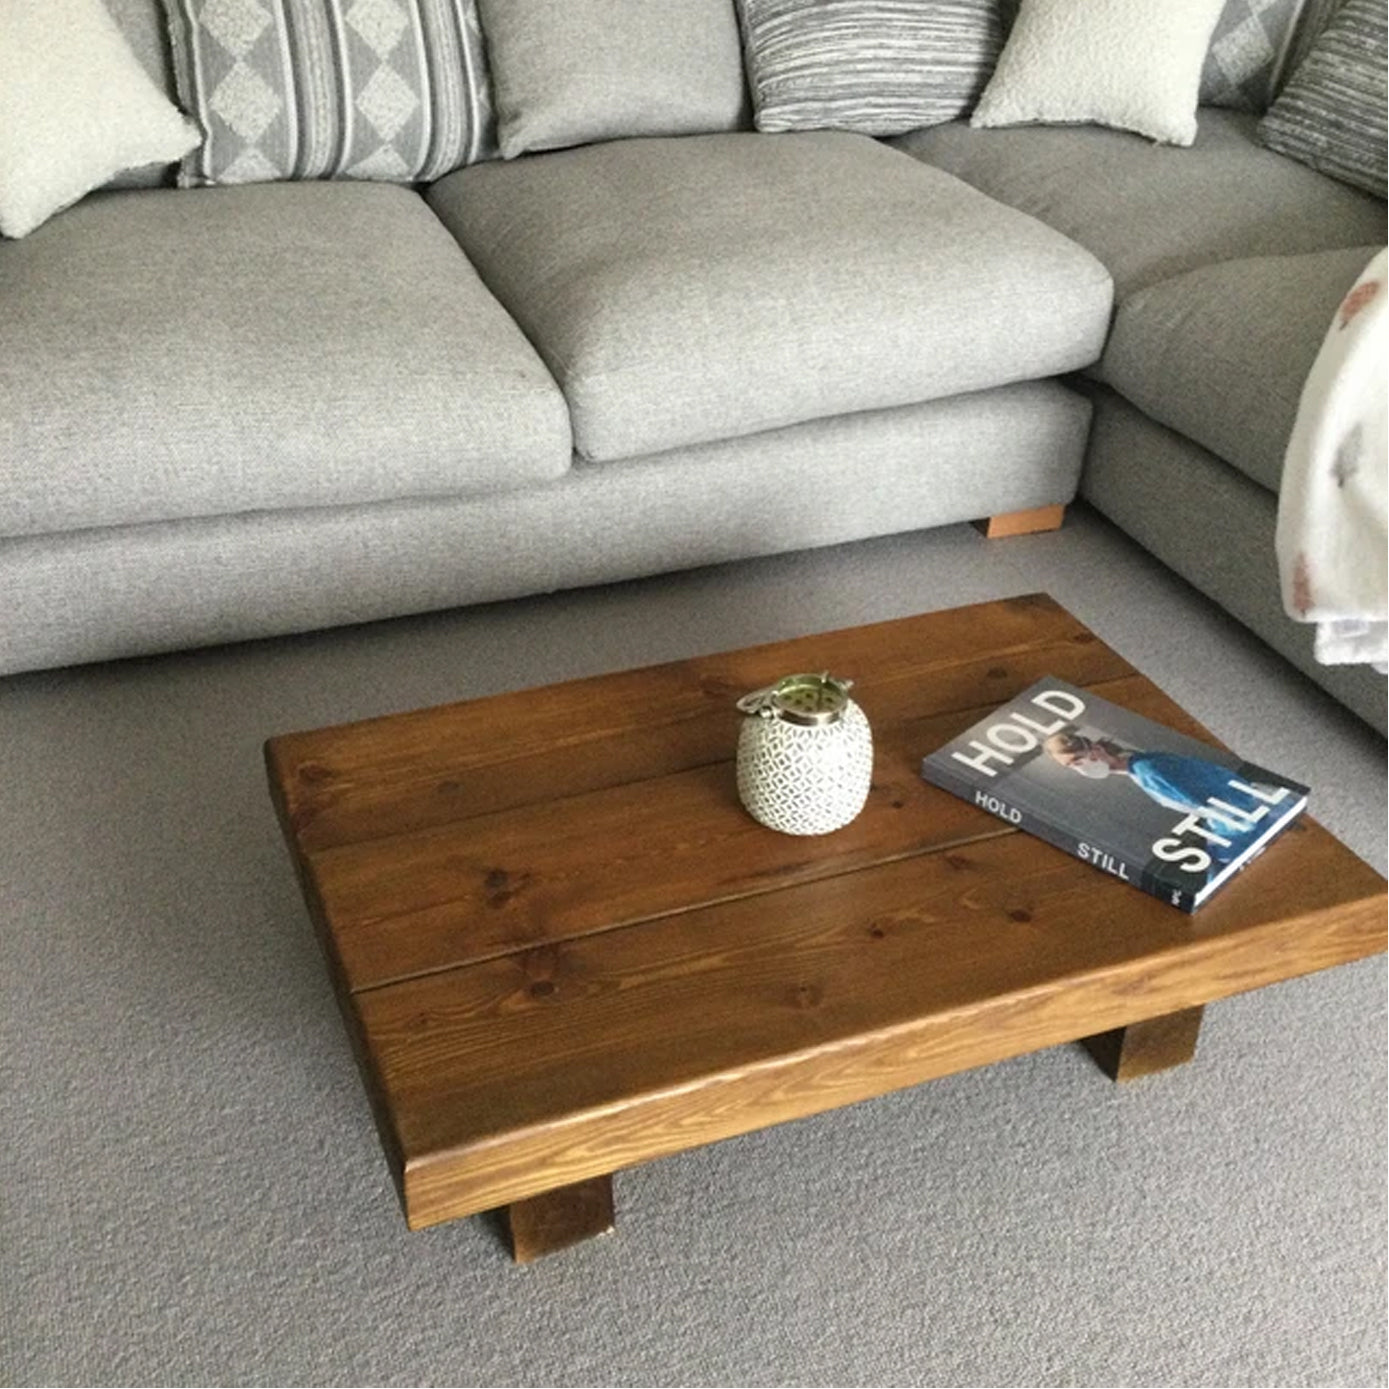 Solid sleeper style coffee table stained to a lovely Oak stain in a choice of coloured, waxed and polished to a high sheen